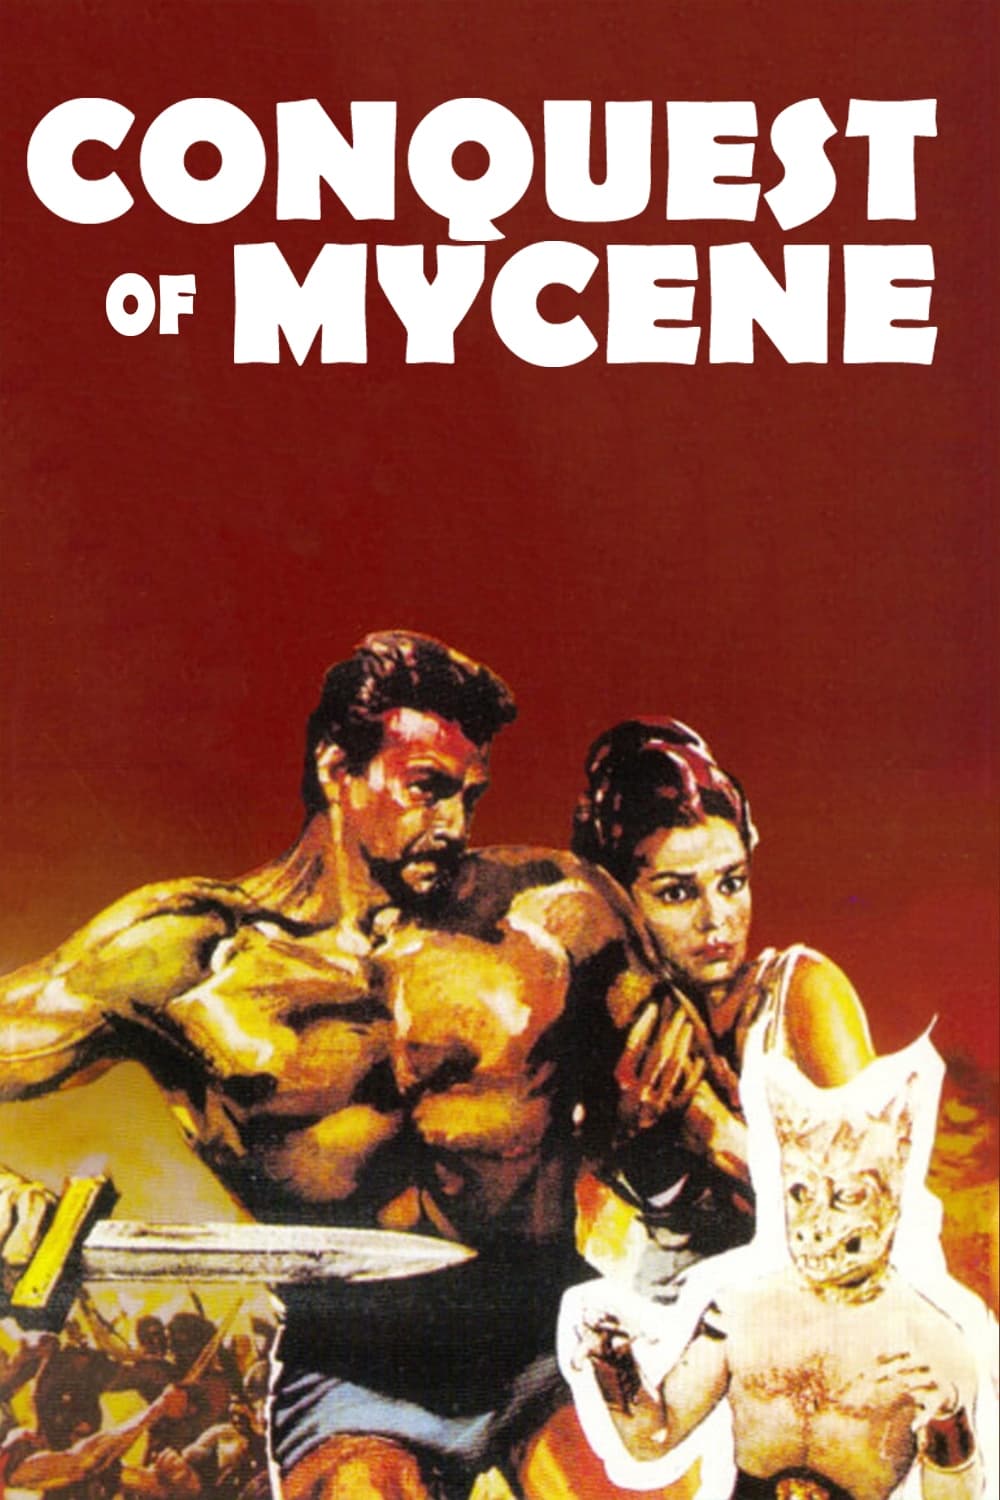 The Conquest of Mycenae (1963)